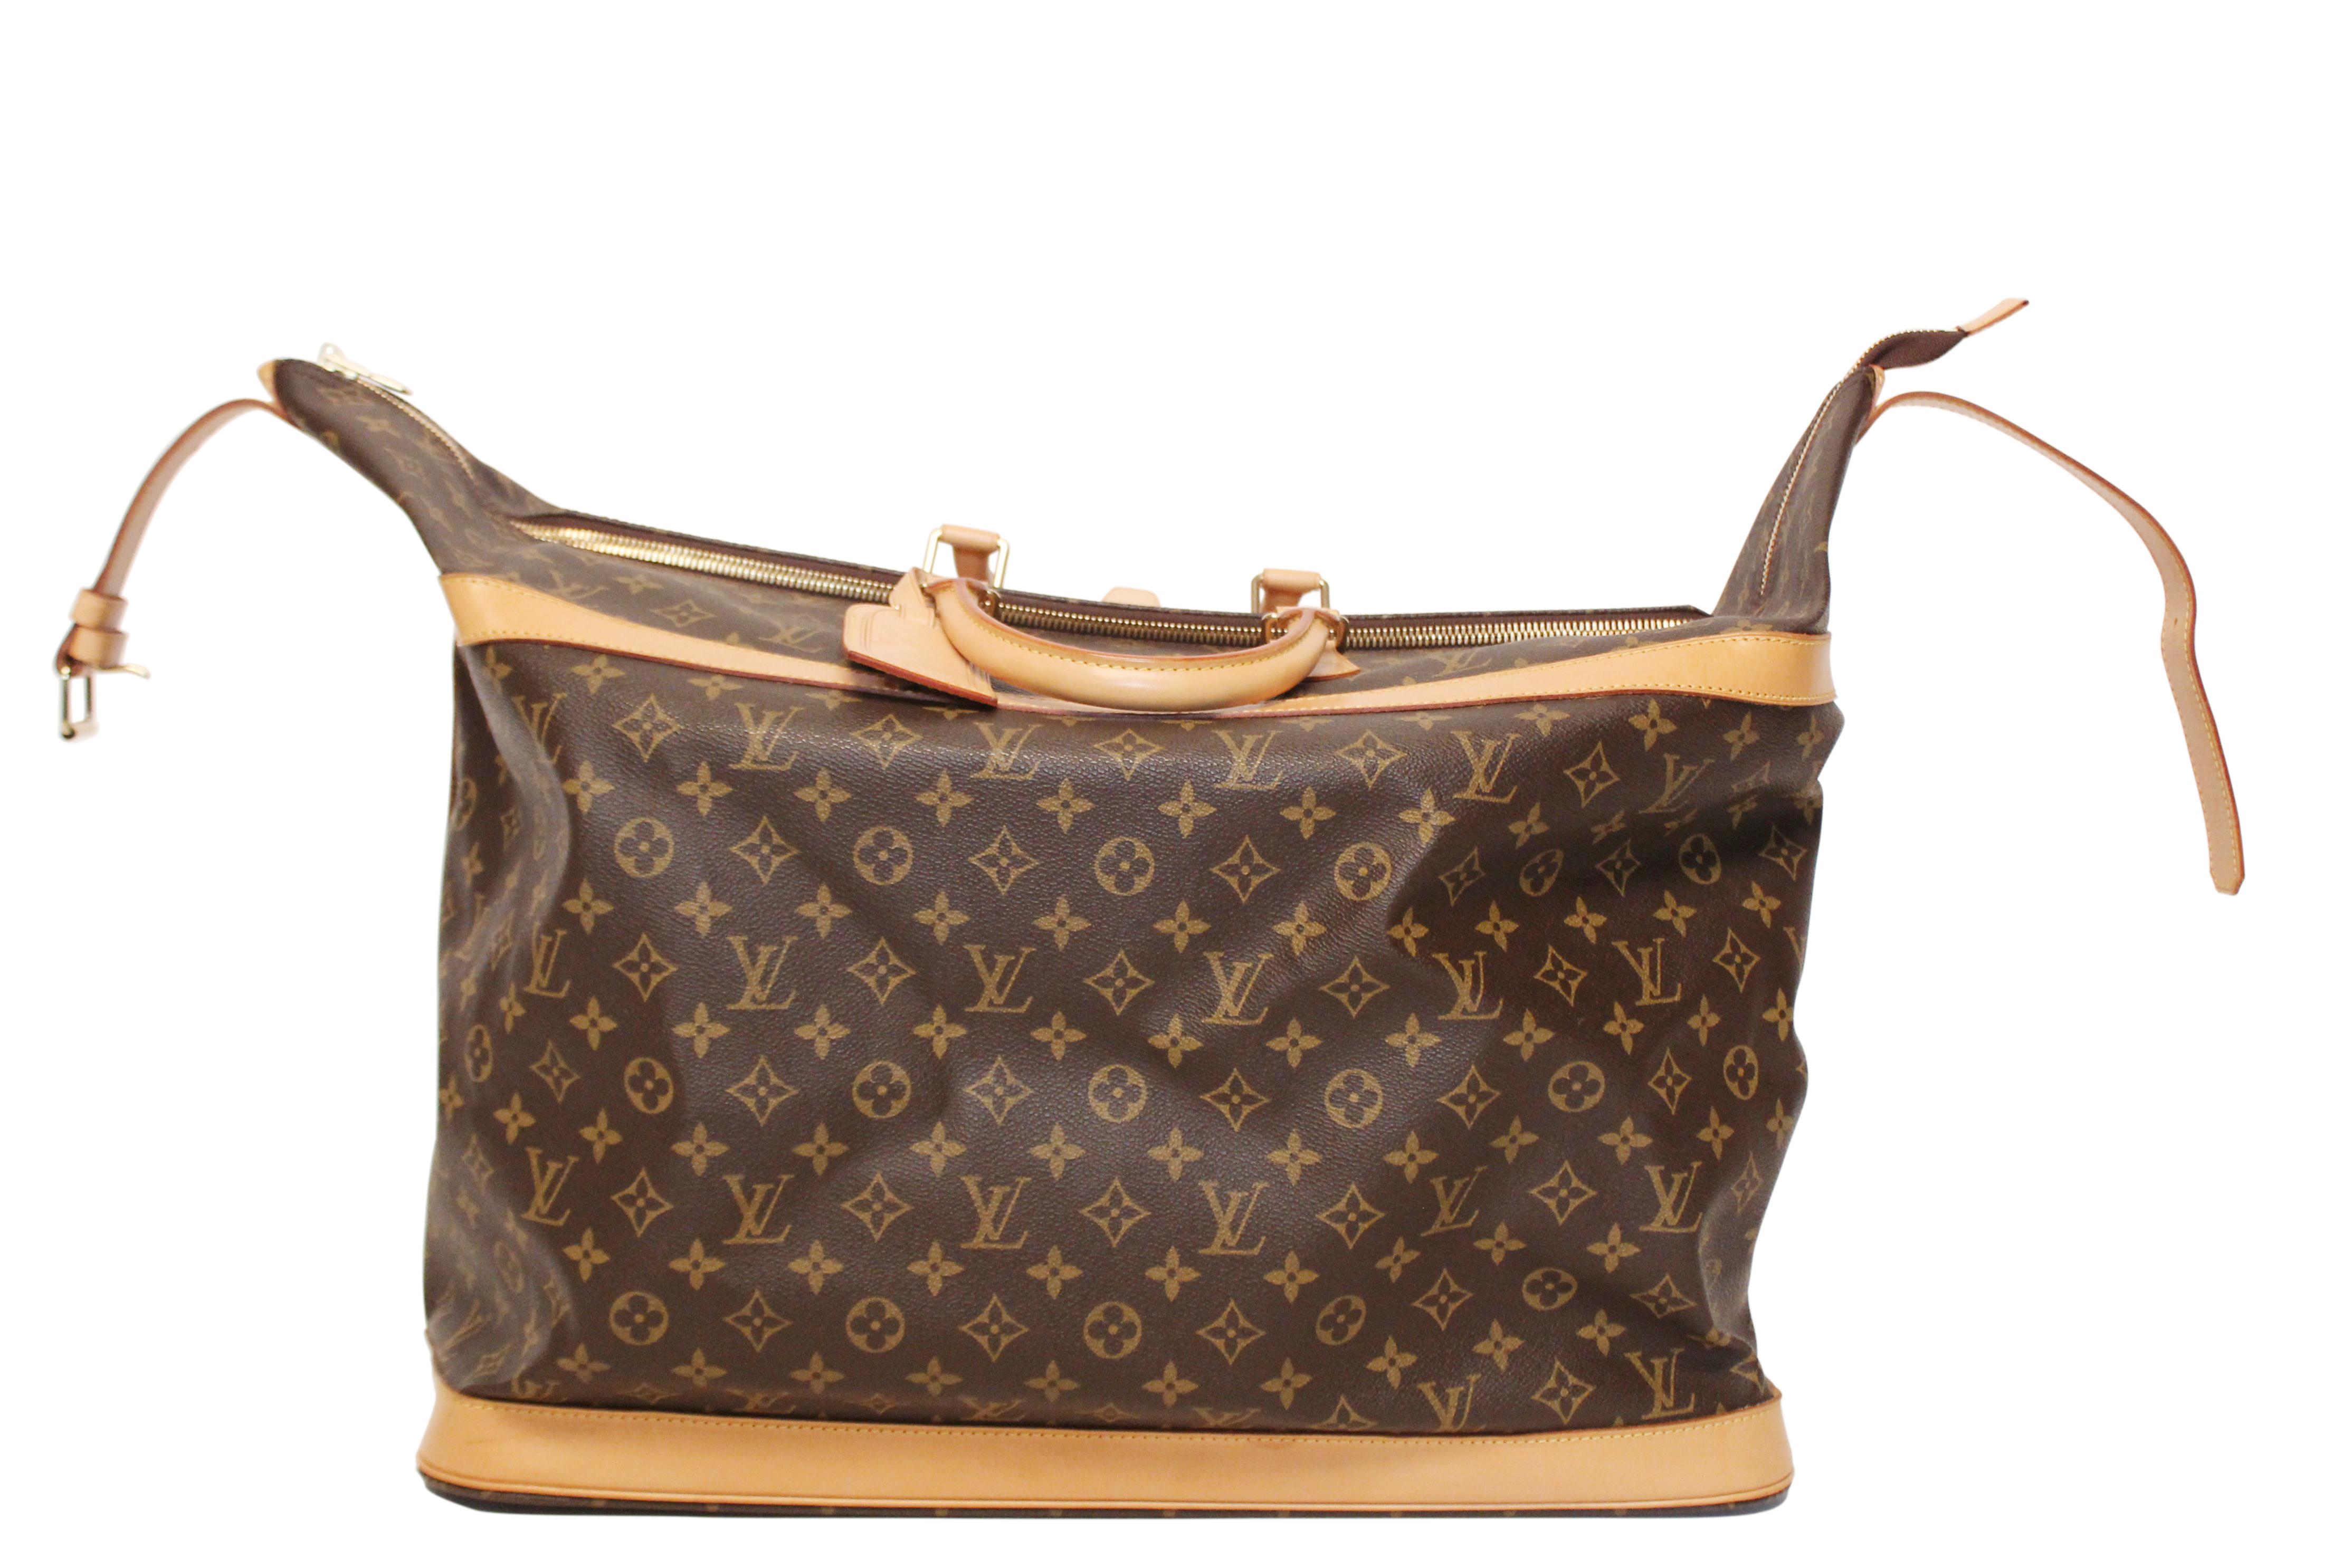 Louis Vuitton monogram vachetta leather and coated canvas Cruiser 50 travel bag with fabric interior. This spacious, light weight, hand held bag features leather top handles, top buckle with silver toned hardware and light tan leather trim